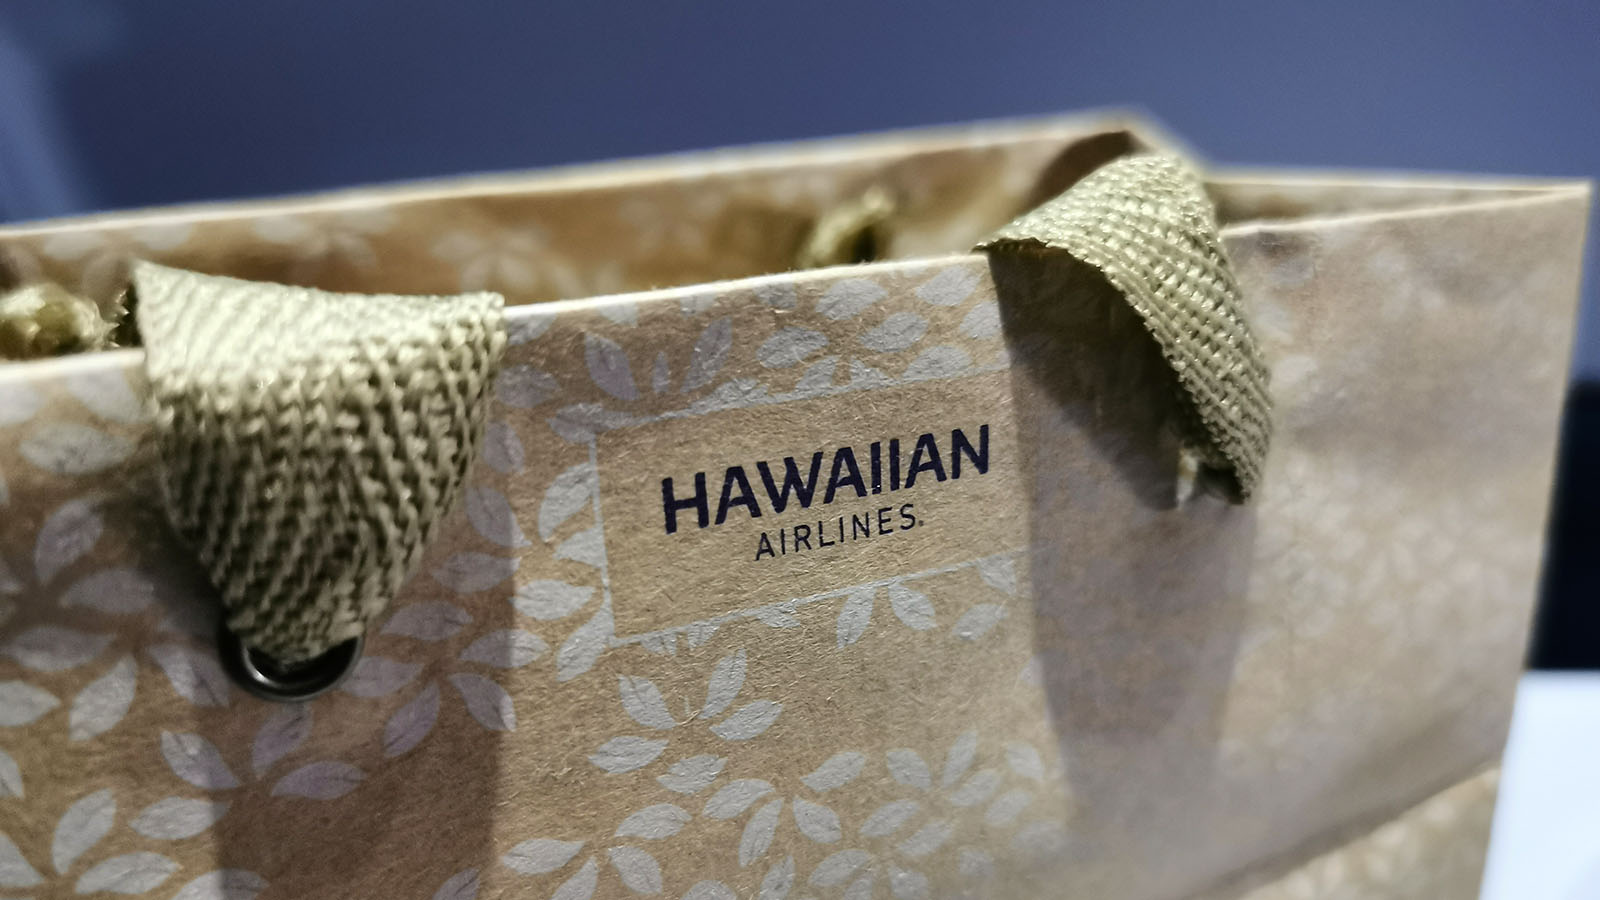 Refreshment in Economy on Hawaiian Airlines